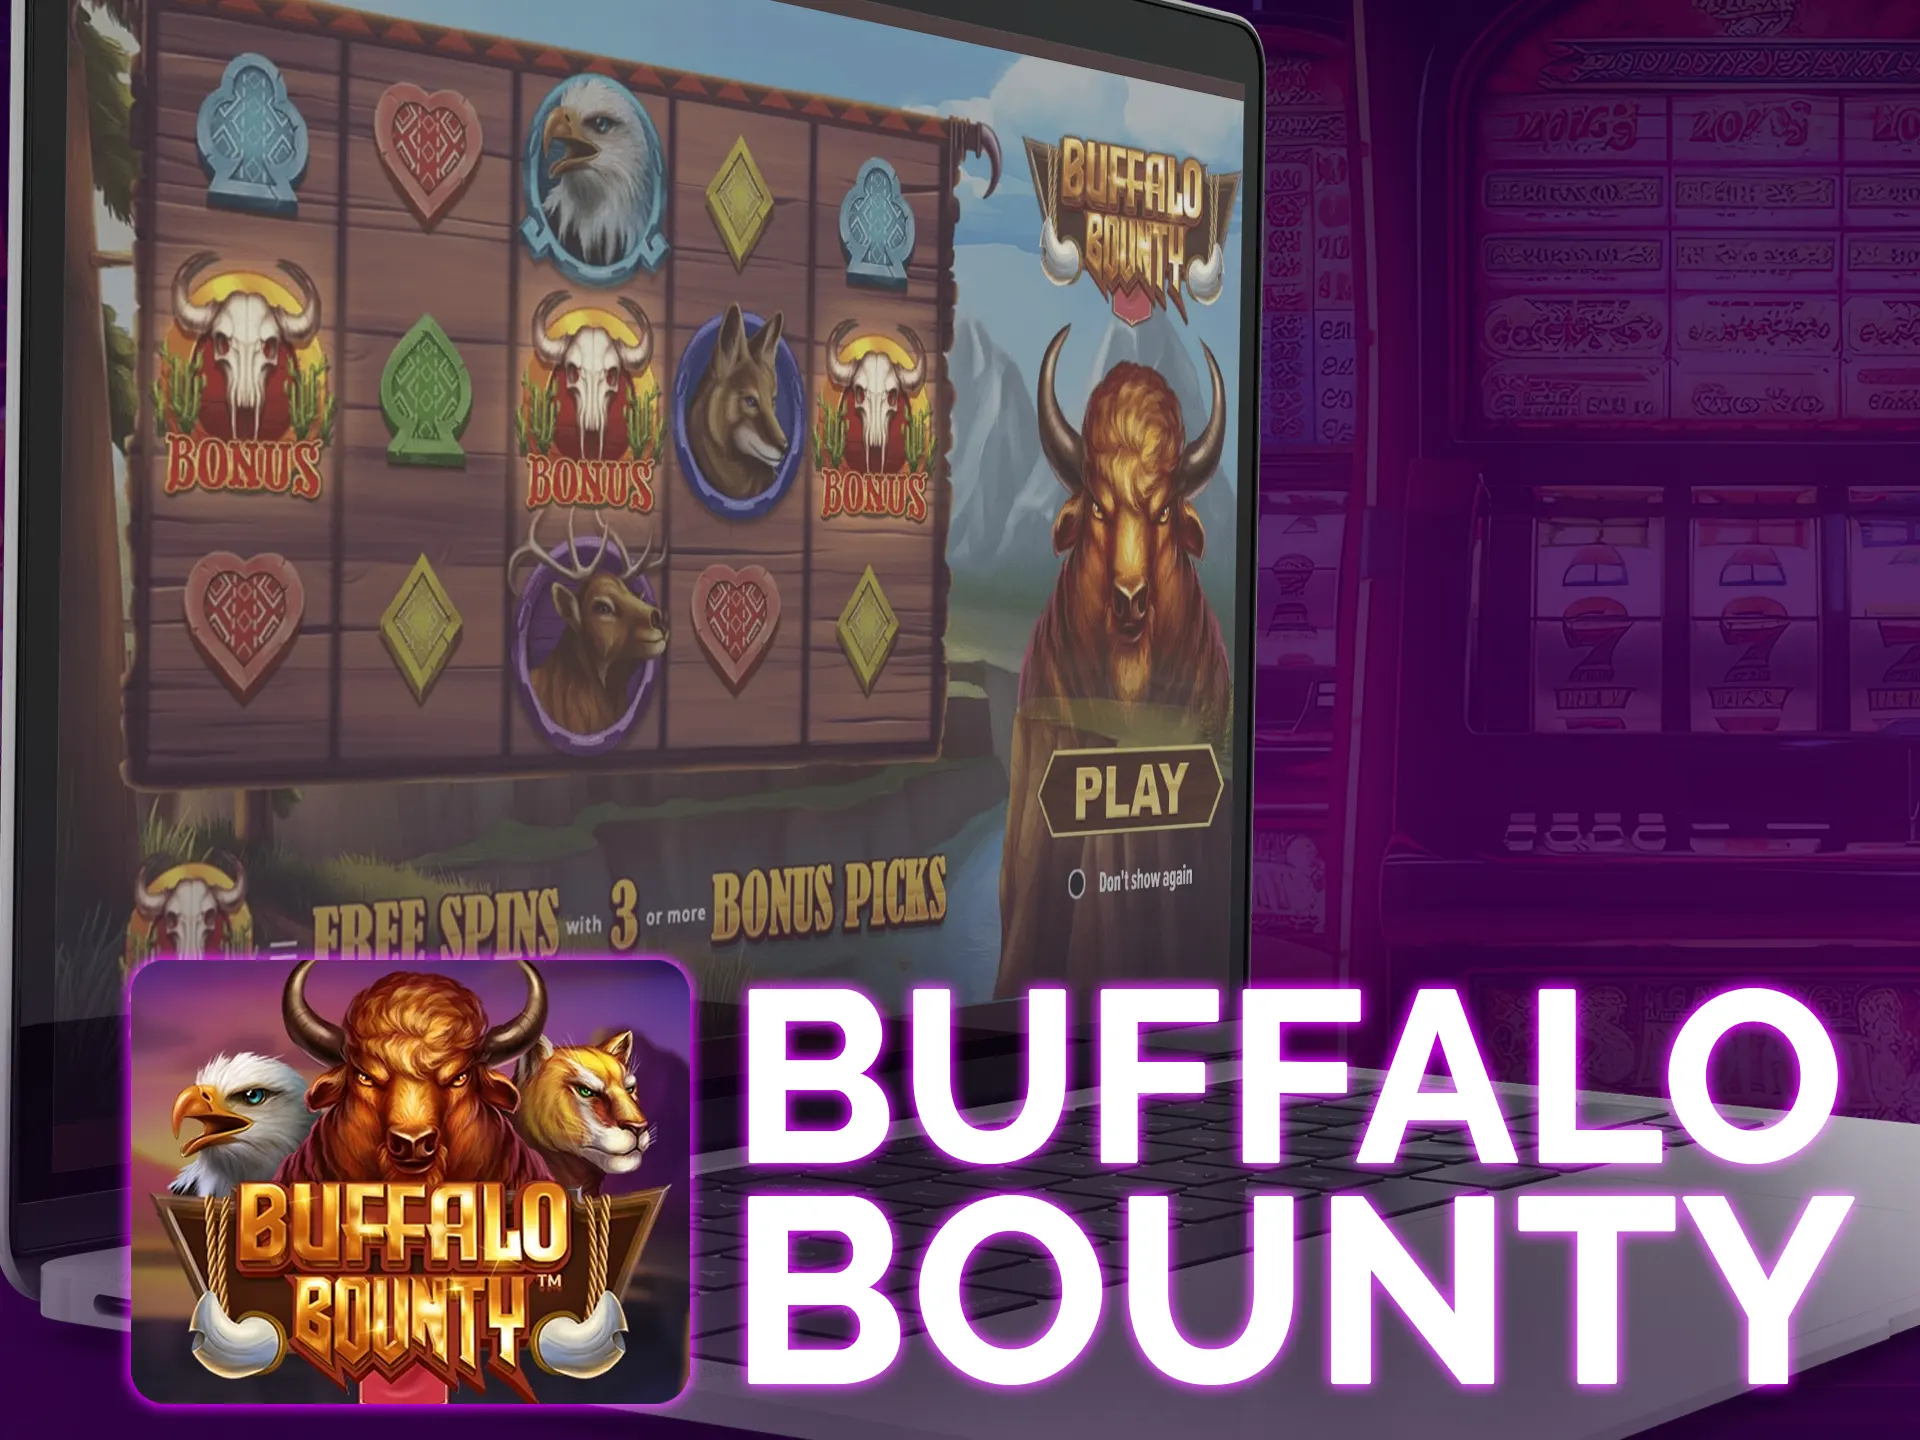 Dragon Gaming's Buffalo Bounty offers wild animal-themed slot excitement.